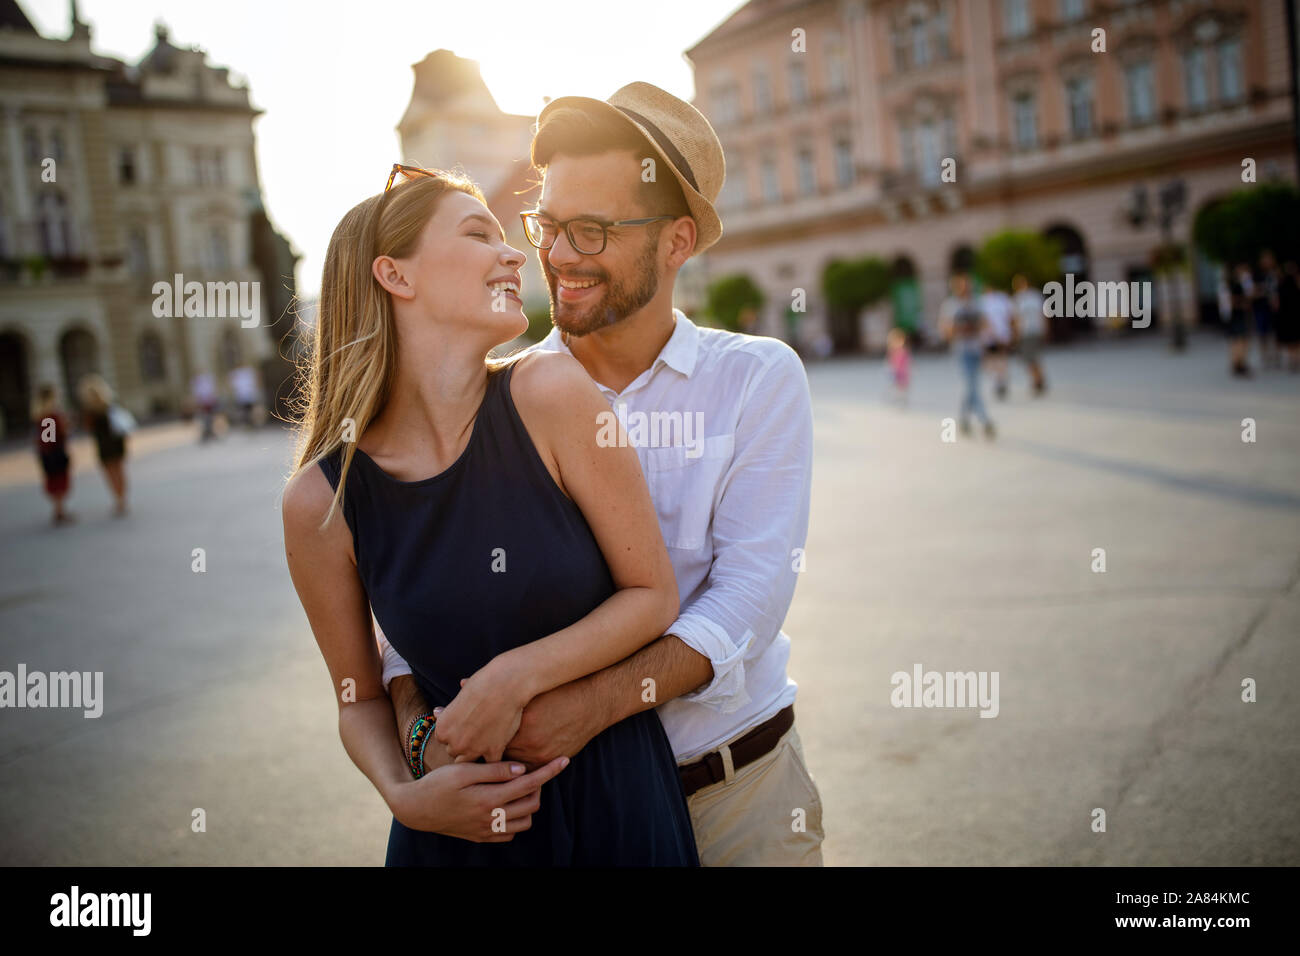 Happy tourist couple in love having fun, travel, smiling on vacation Stock Photo